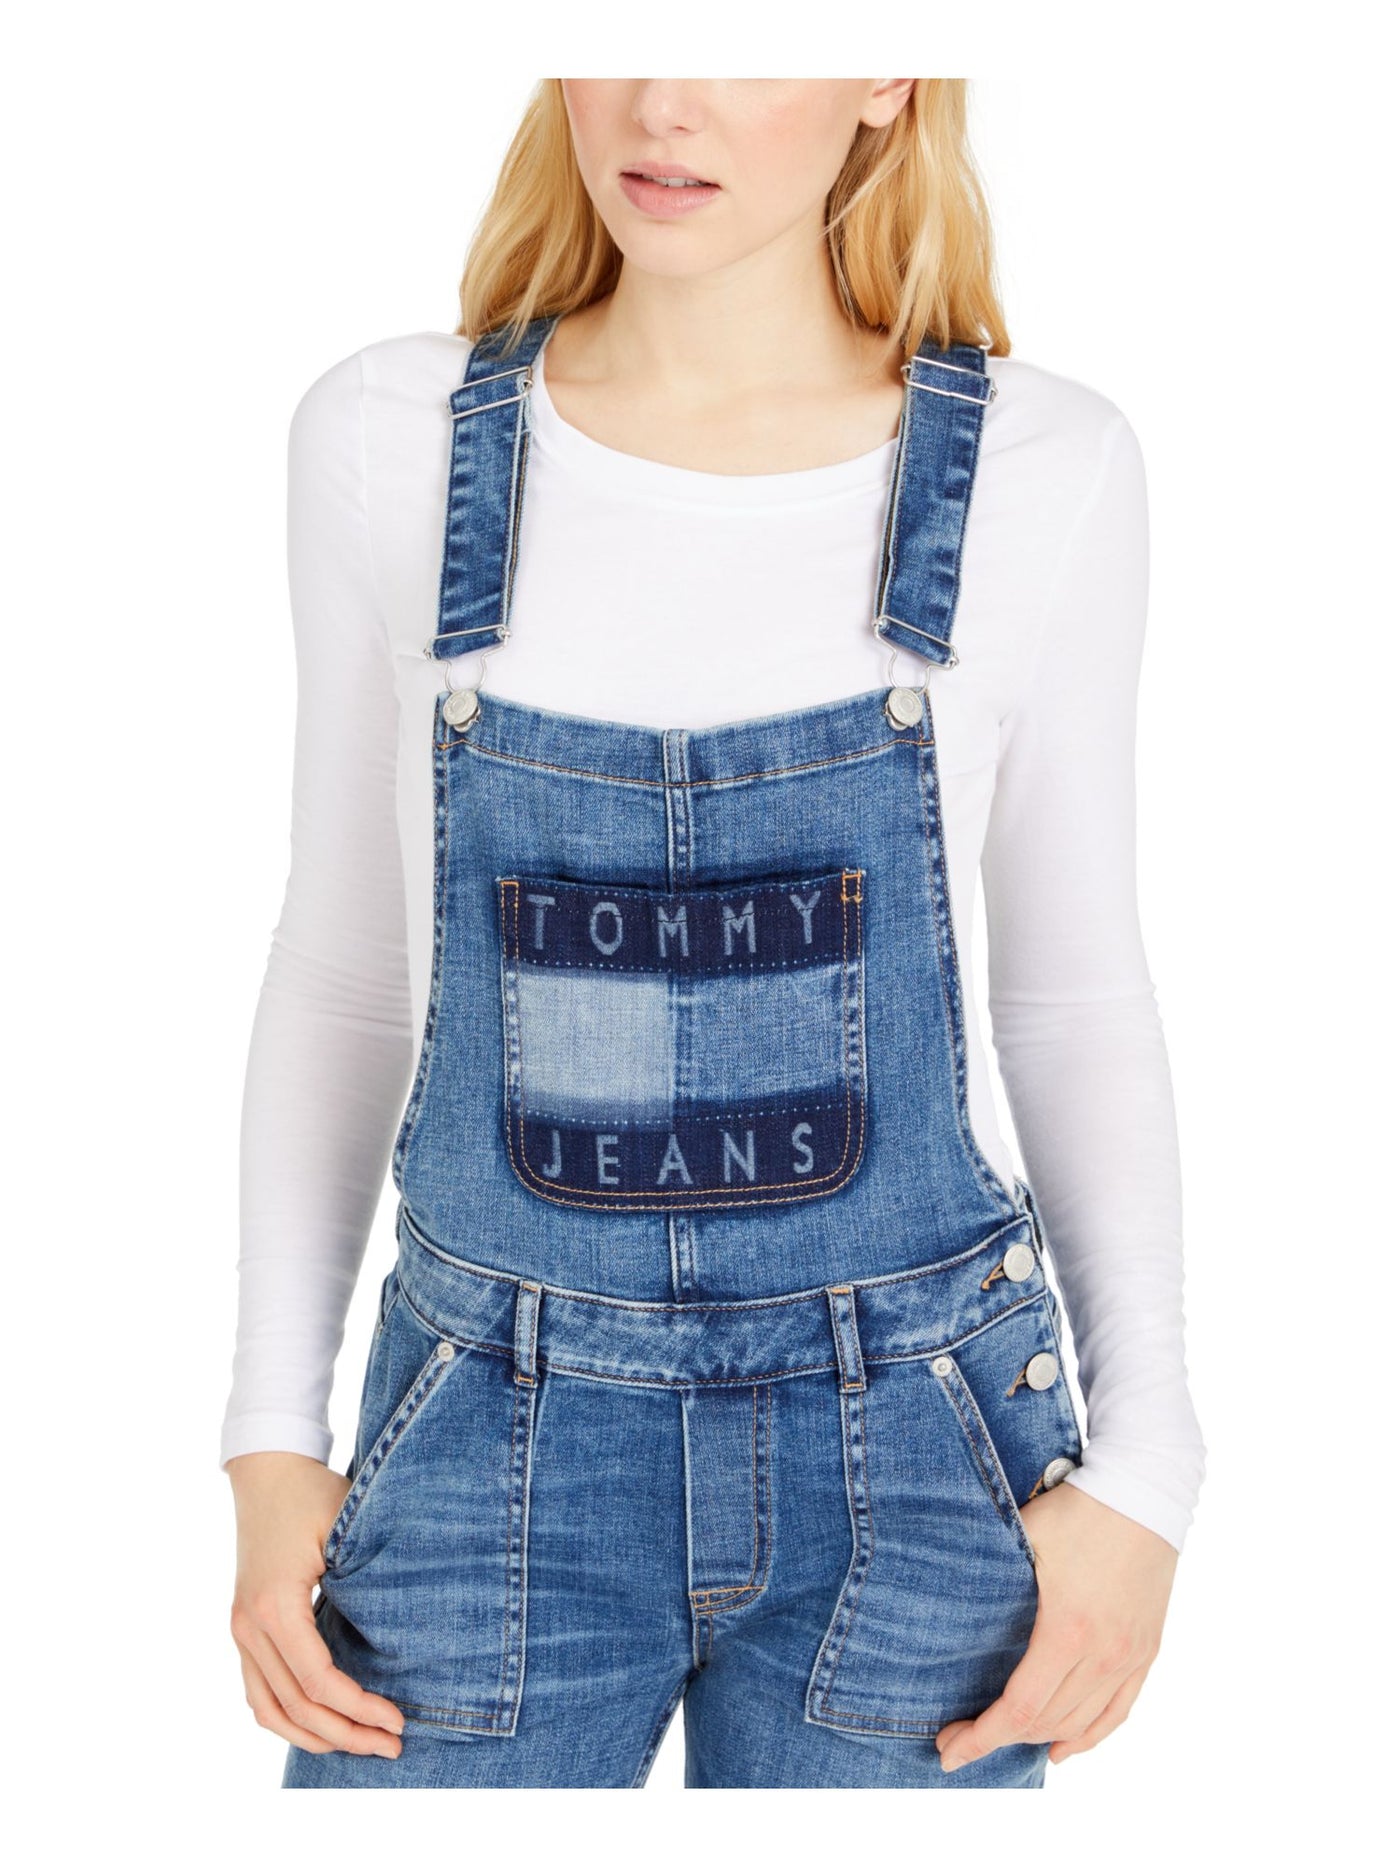 TOMMY JEANS Womens Denim Distressed Pocketed Bib Overalls Adjustable Straps Sleeveless Square Neck Cropped Jumpsuit